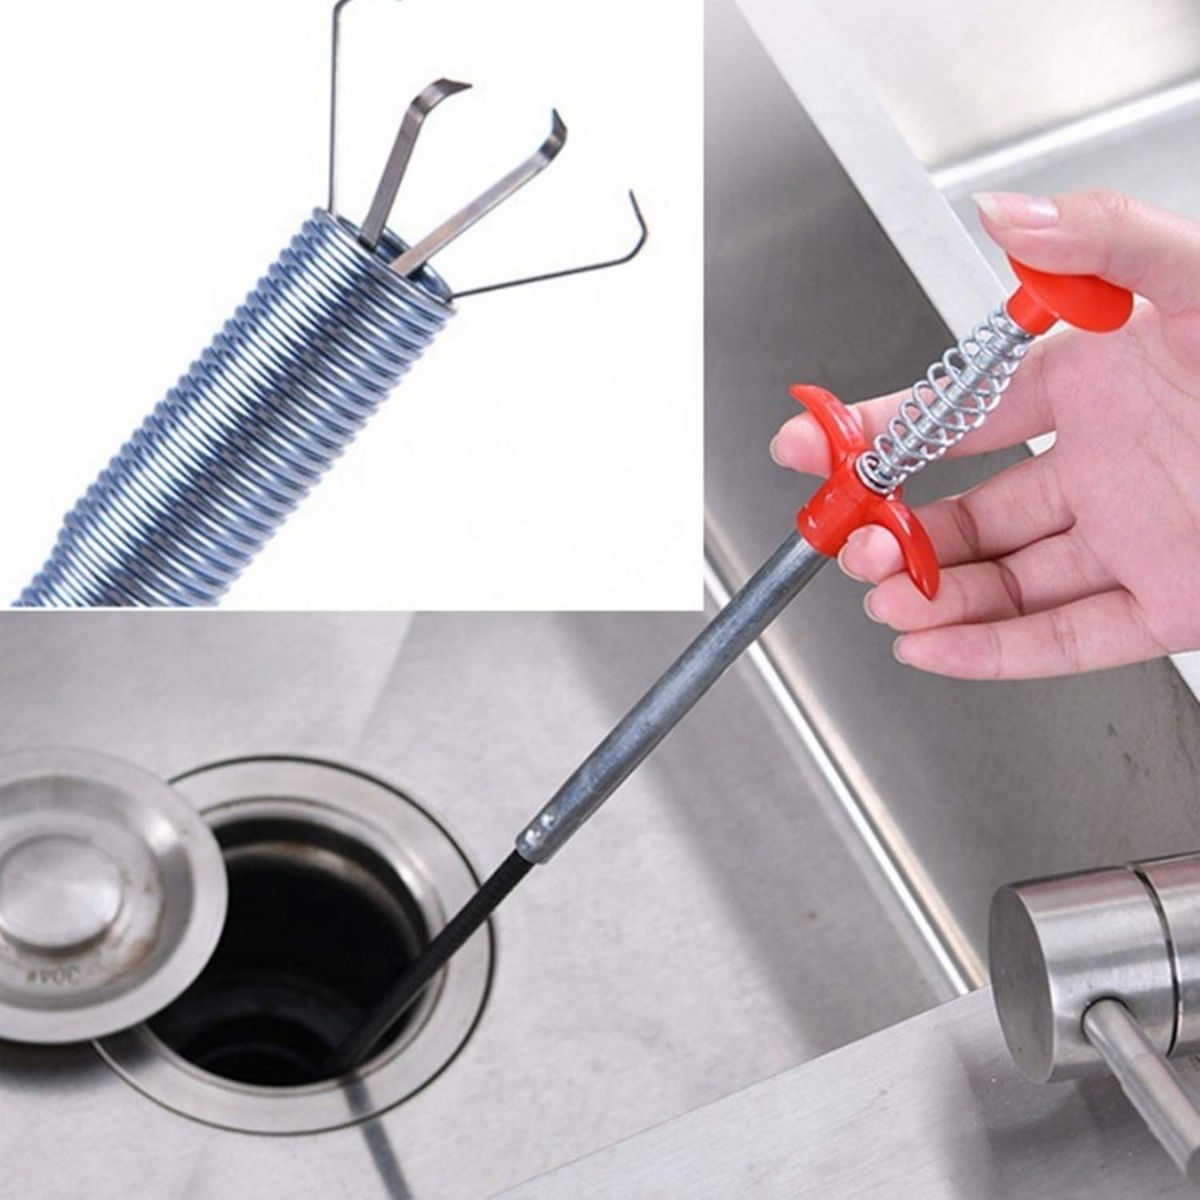 Drain Clog Remover Tool - Flexible Household Sink Grabber With 4 Claws Flexible Hose Picking Aid Tool - 1.6m - Sewer Cleaning Hook Snake Drain Grabber Tool Toilet Clog Remover